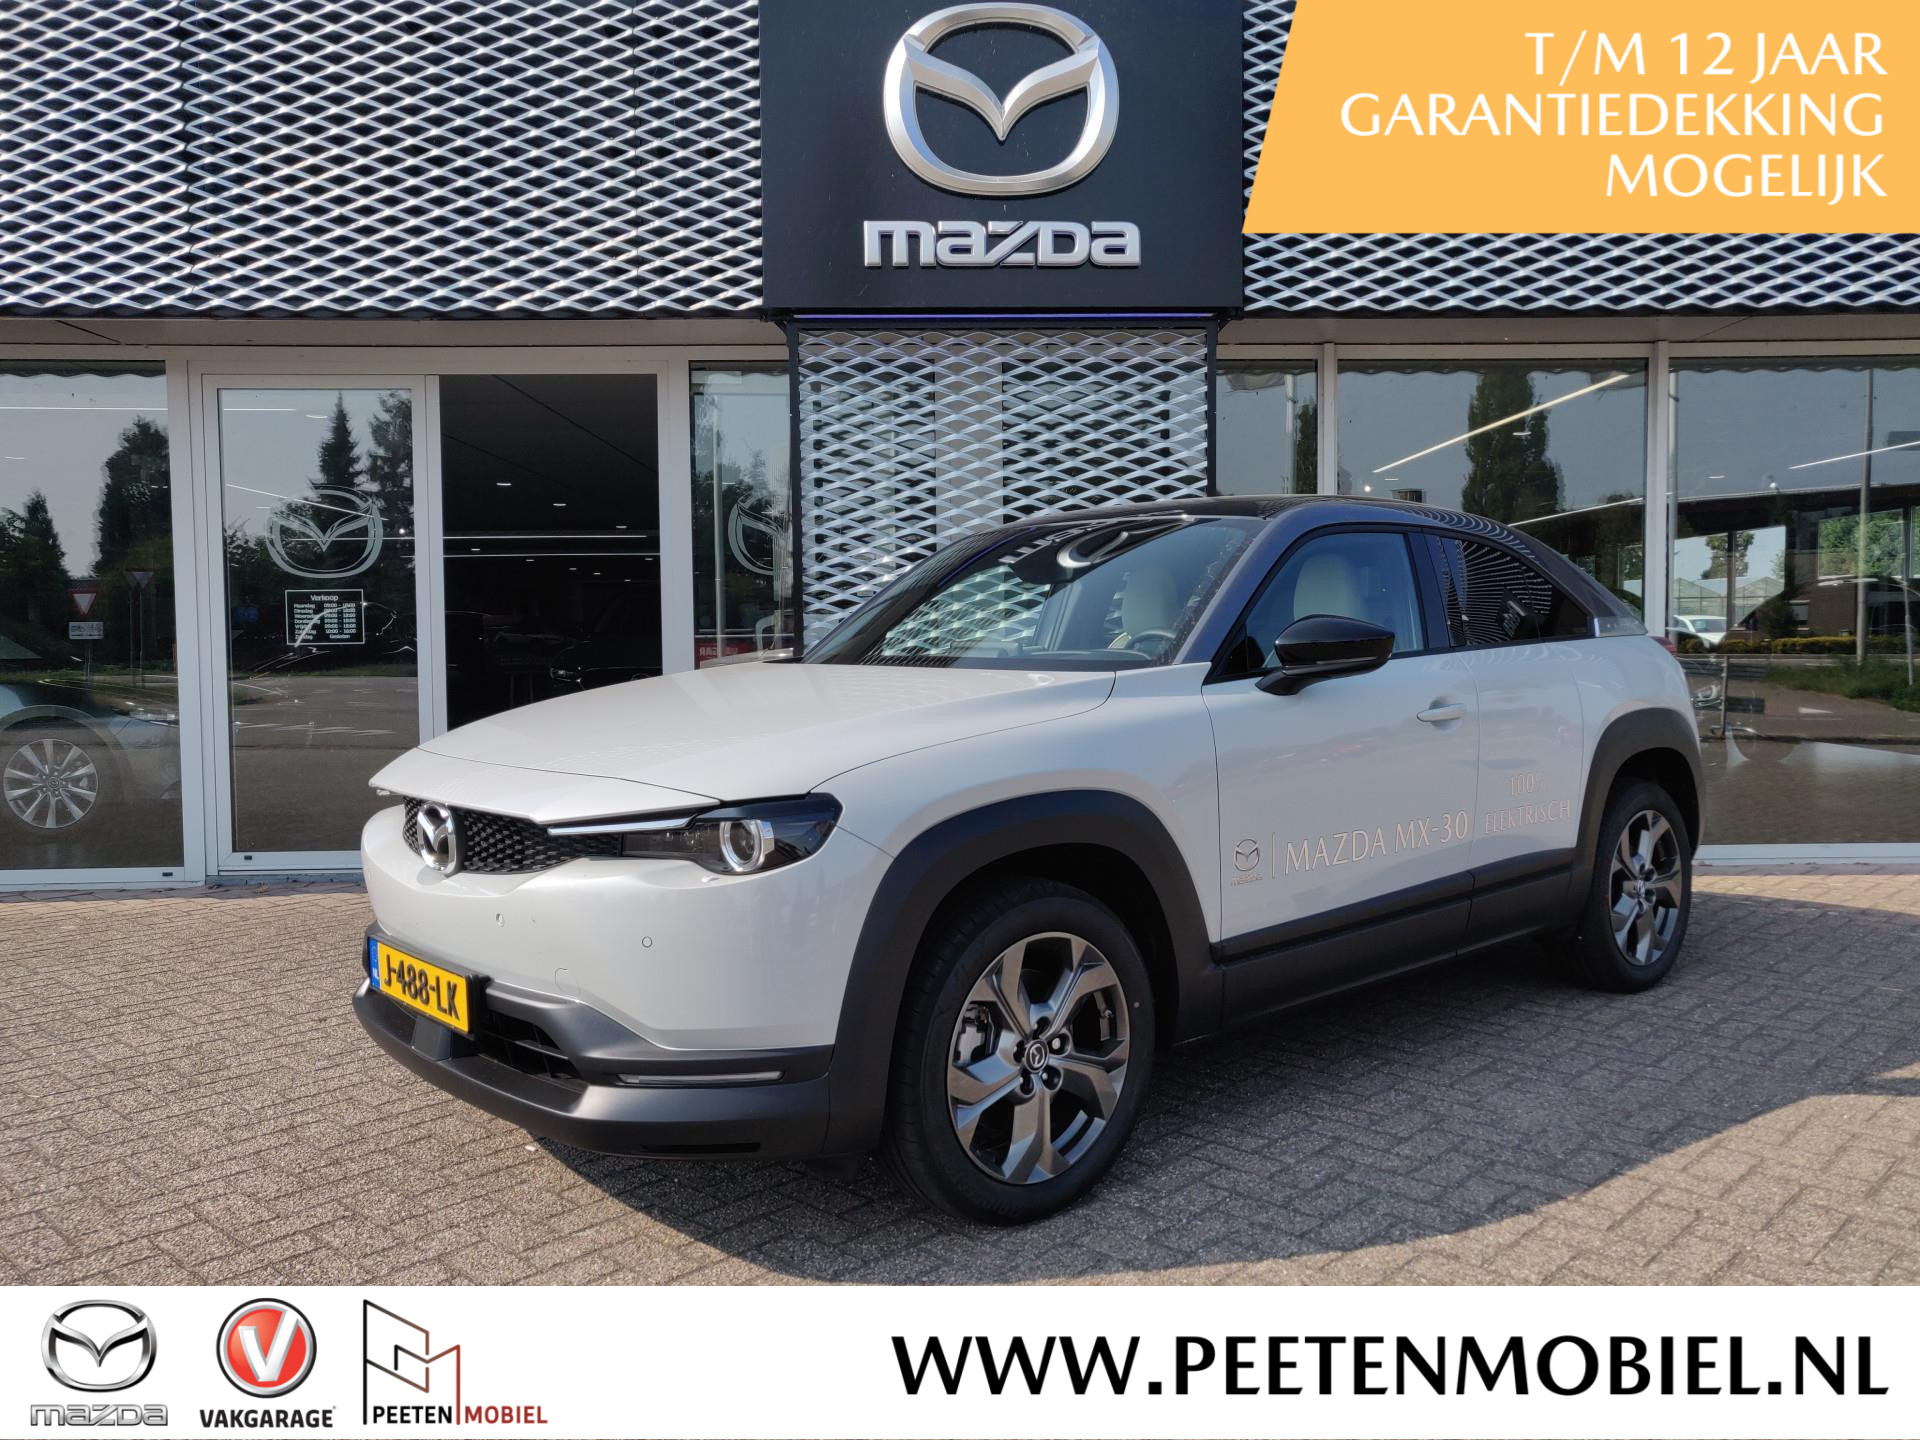 Mazda MX-30 E-Skyactiv 145 First Edition Automaat | BTW AUTO | PARTICULIERE SUBSIDIE €. 2.000,-